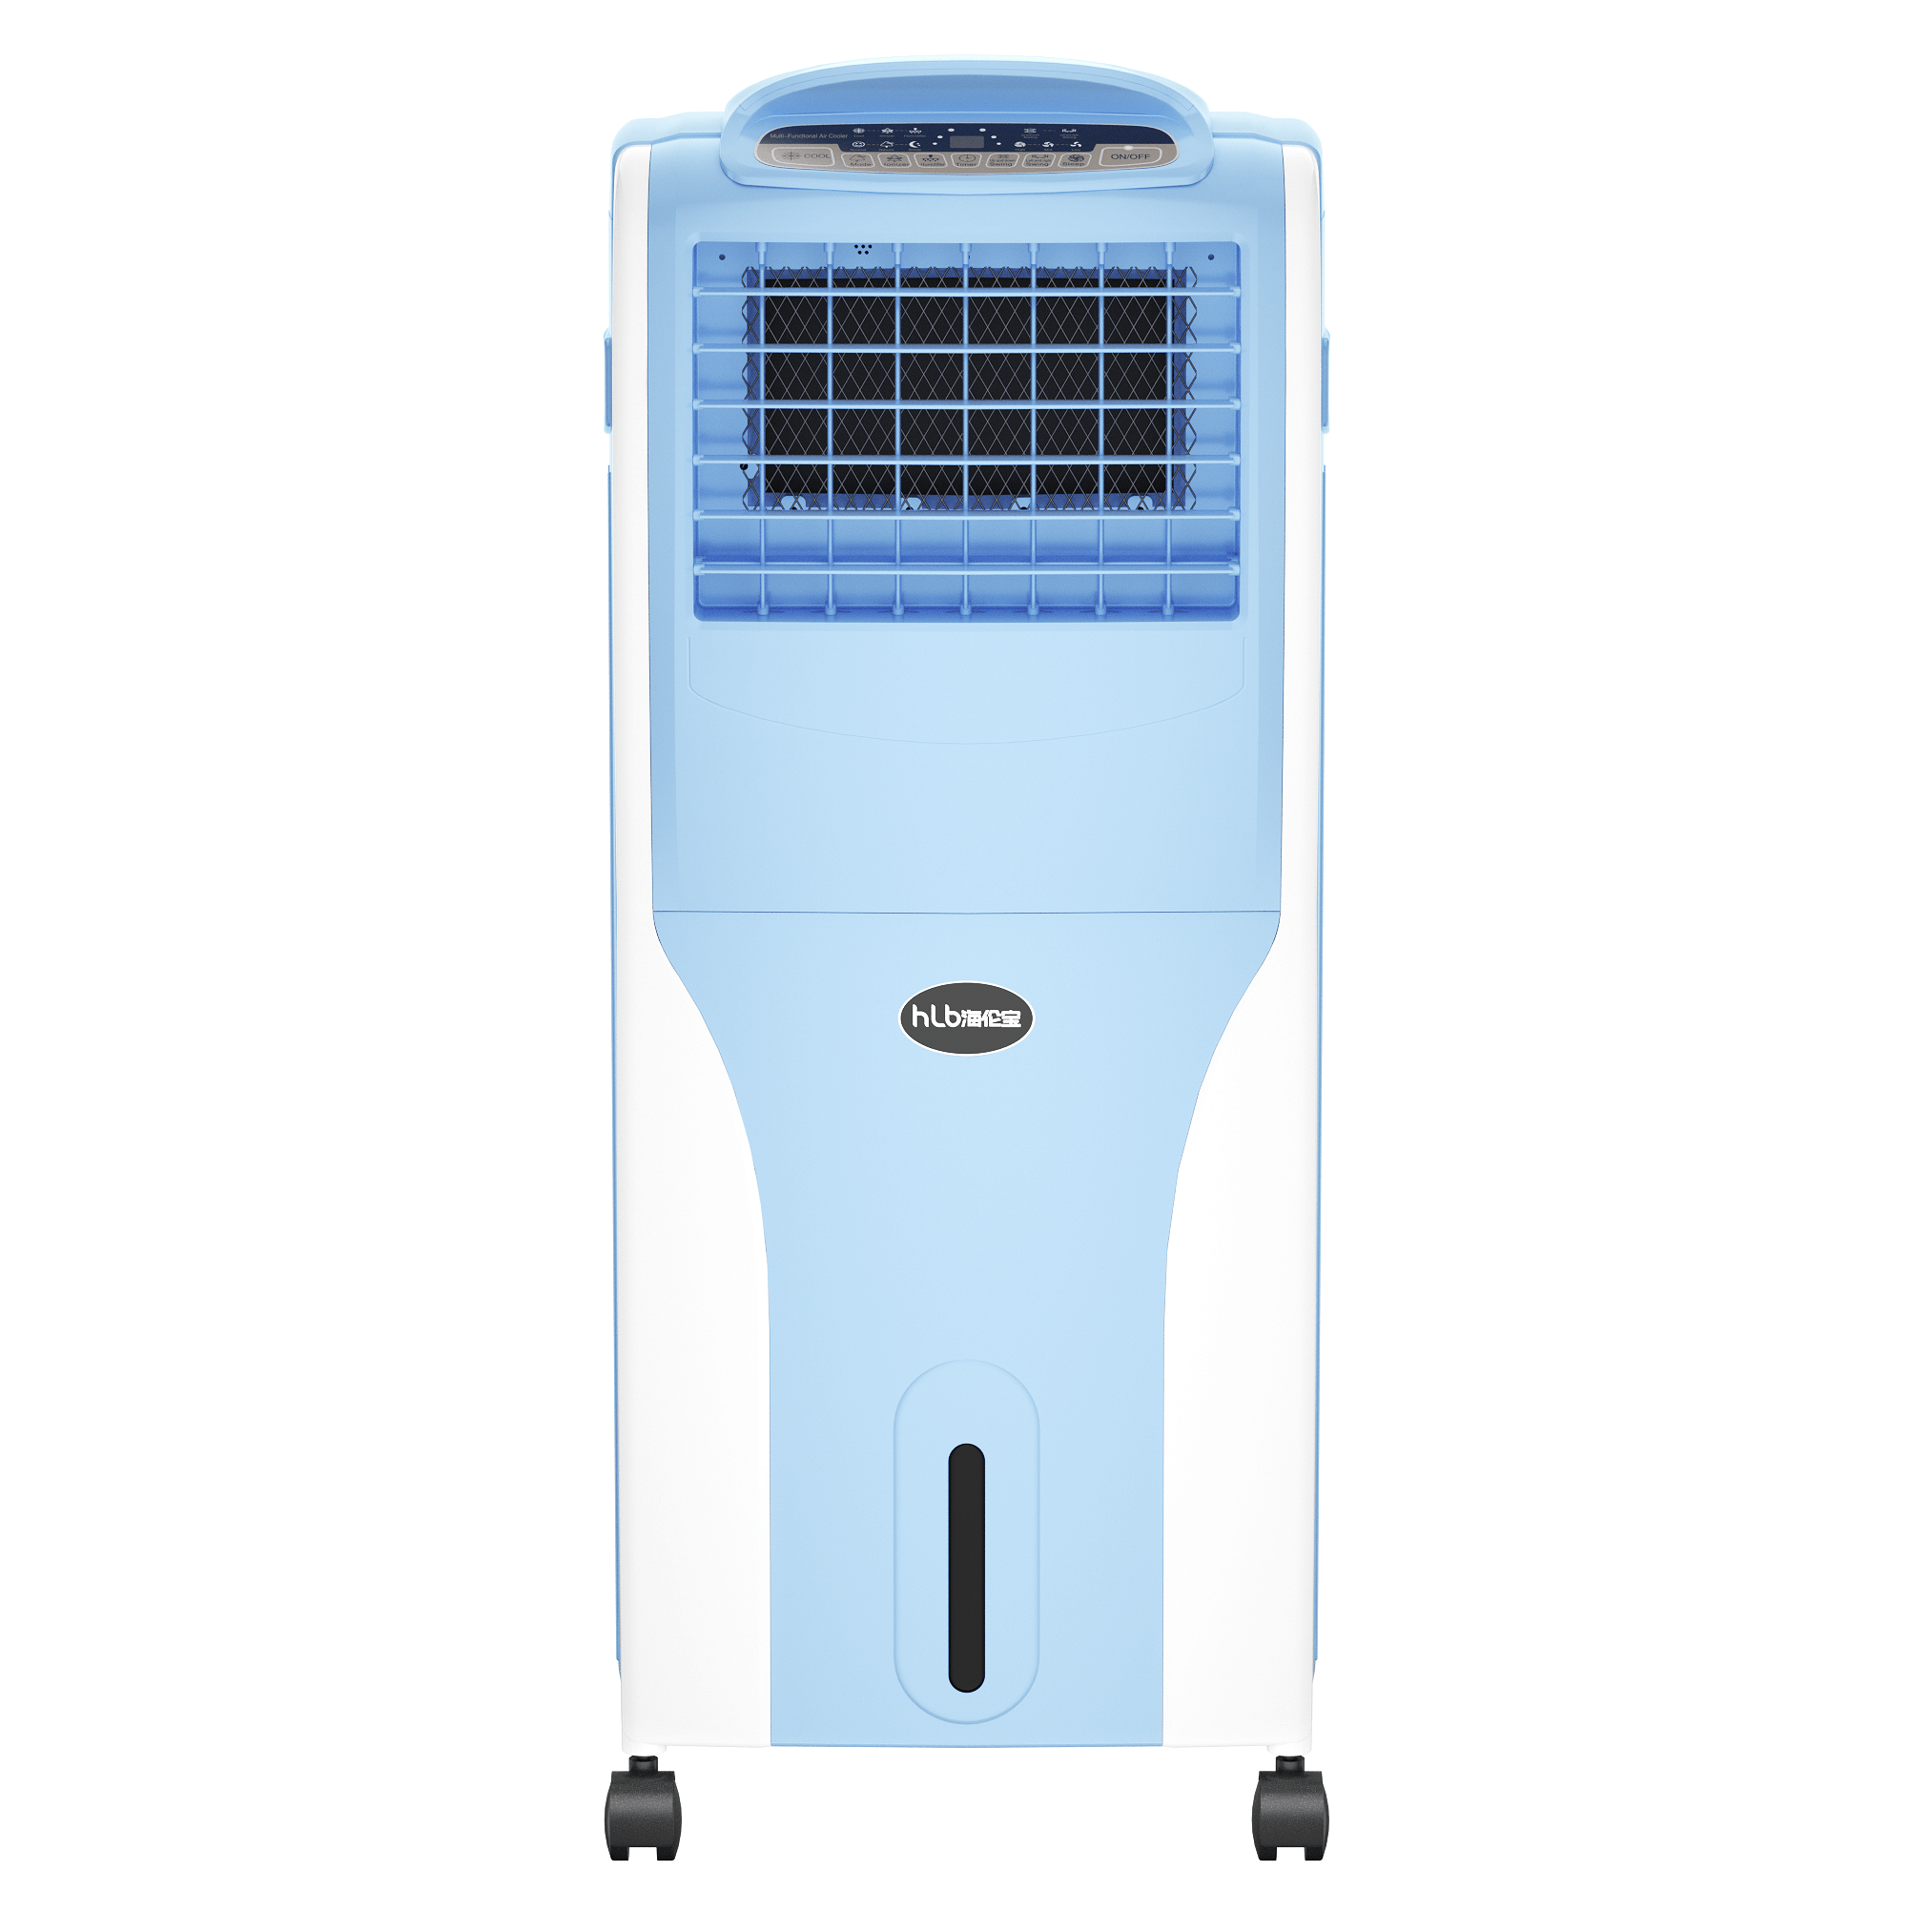 Key electronics of the Air Cooler and manufacturing standard specifications